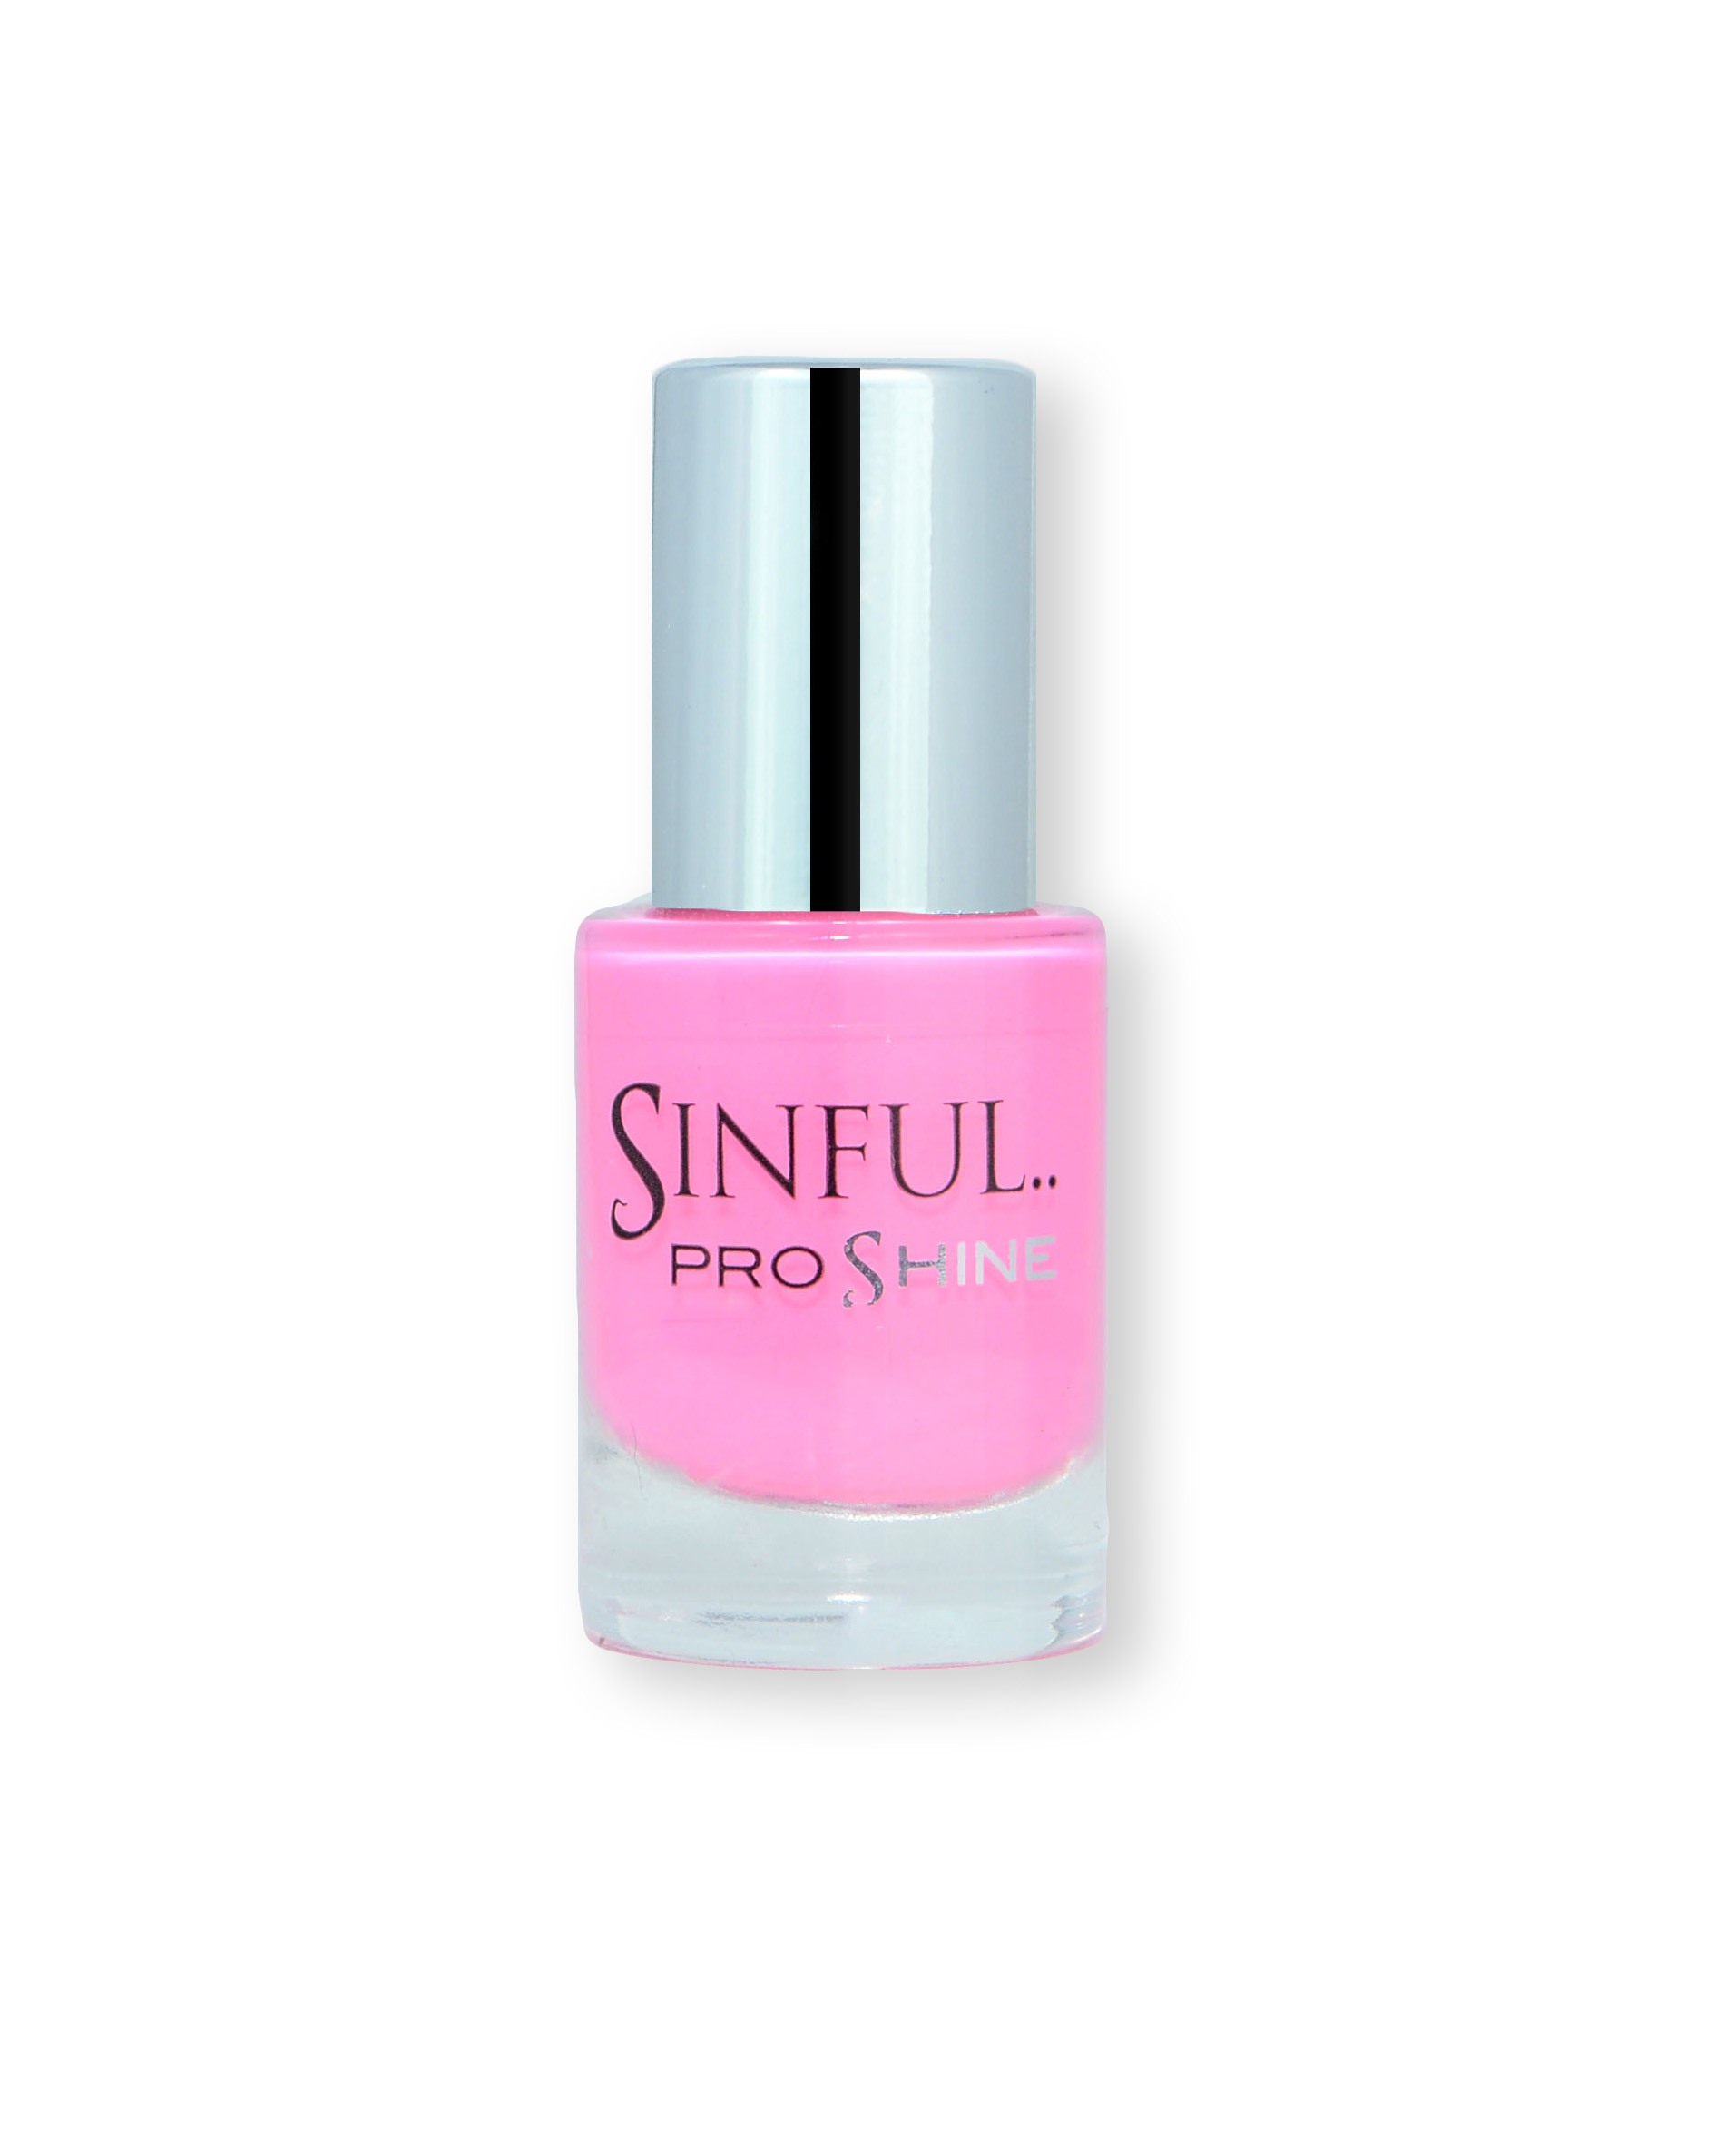 Sinful PROshine is a revolution into top spec imitation gel-like formula, easy application, full coverage and a sleek finish. Spoil yourself with the choice of 42 shades, expertly formulated with the finest grade of pigments. Babydoll: Our softer alternative to a neon pink. Creme finish